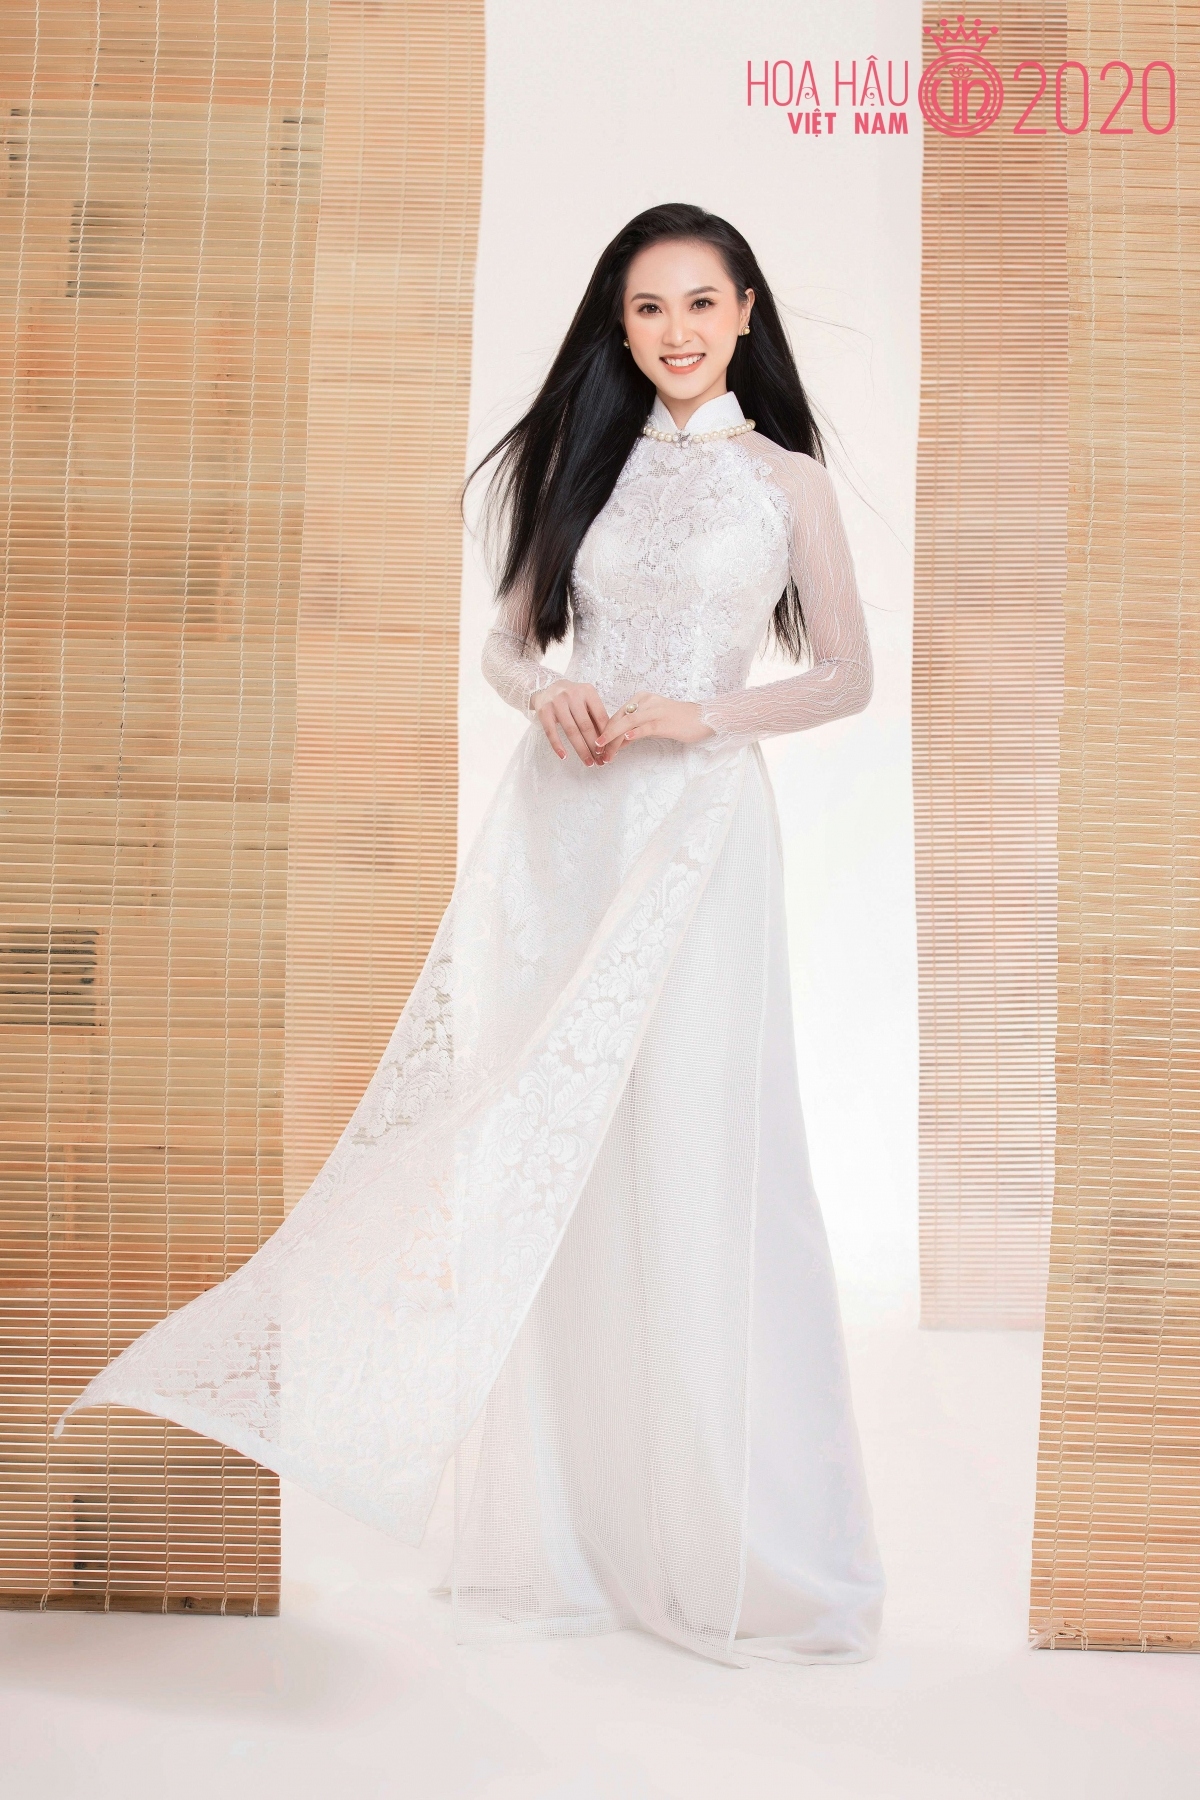 leading miss vietnam contestants shine in ao dai photo shoot picture 16